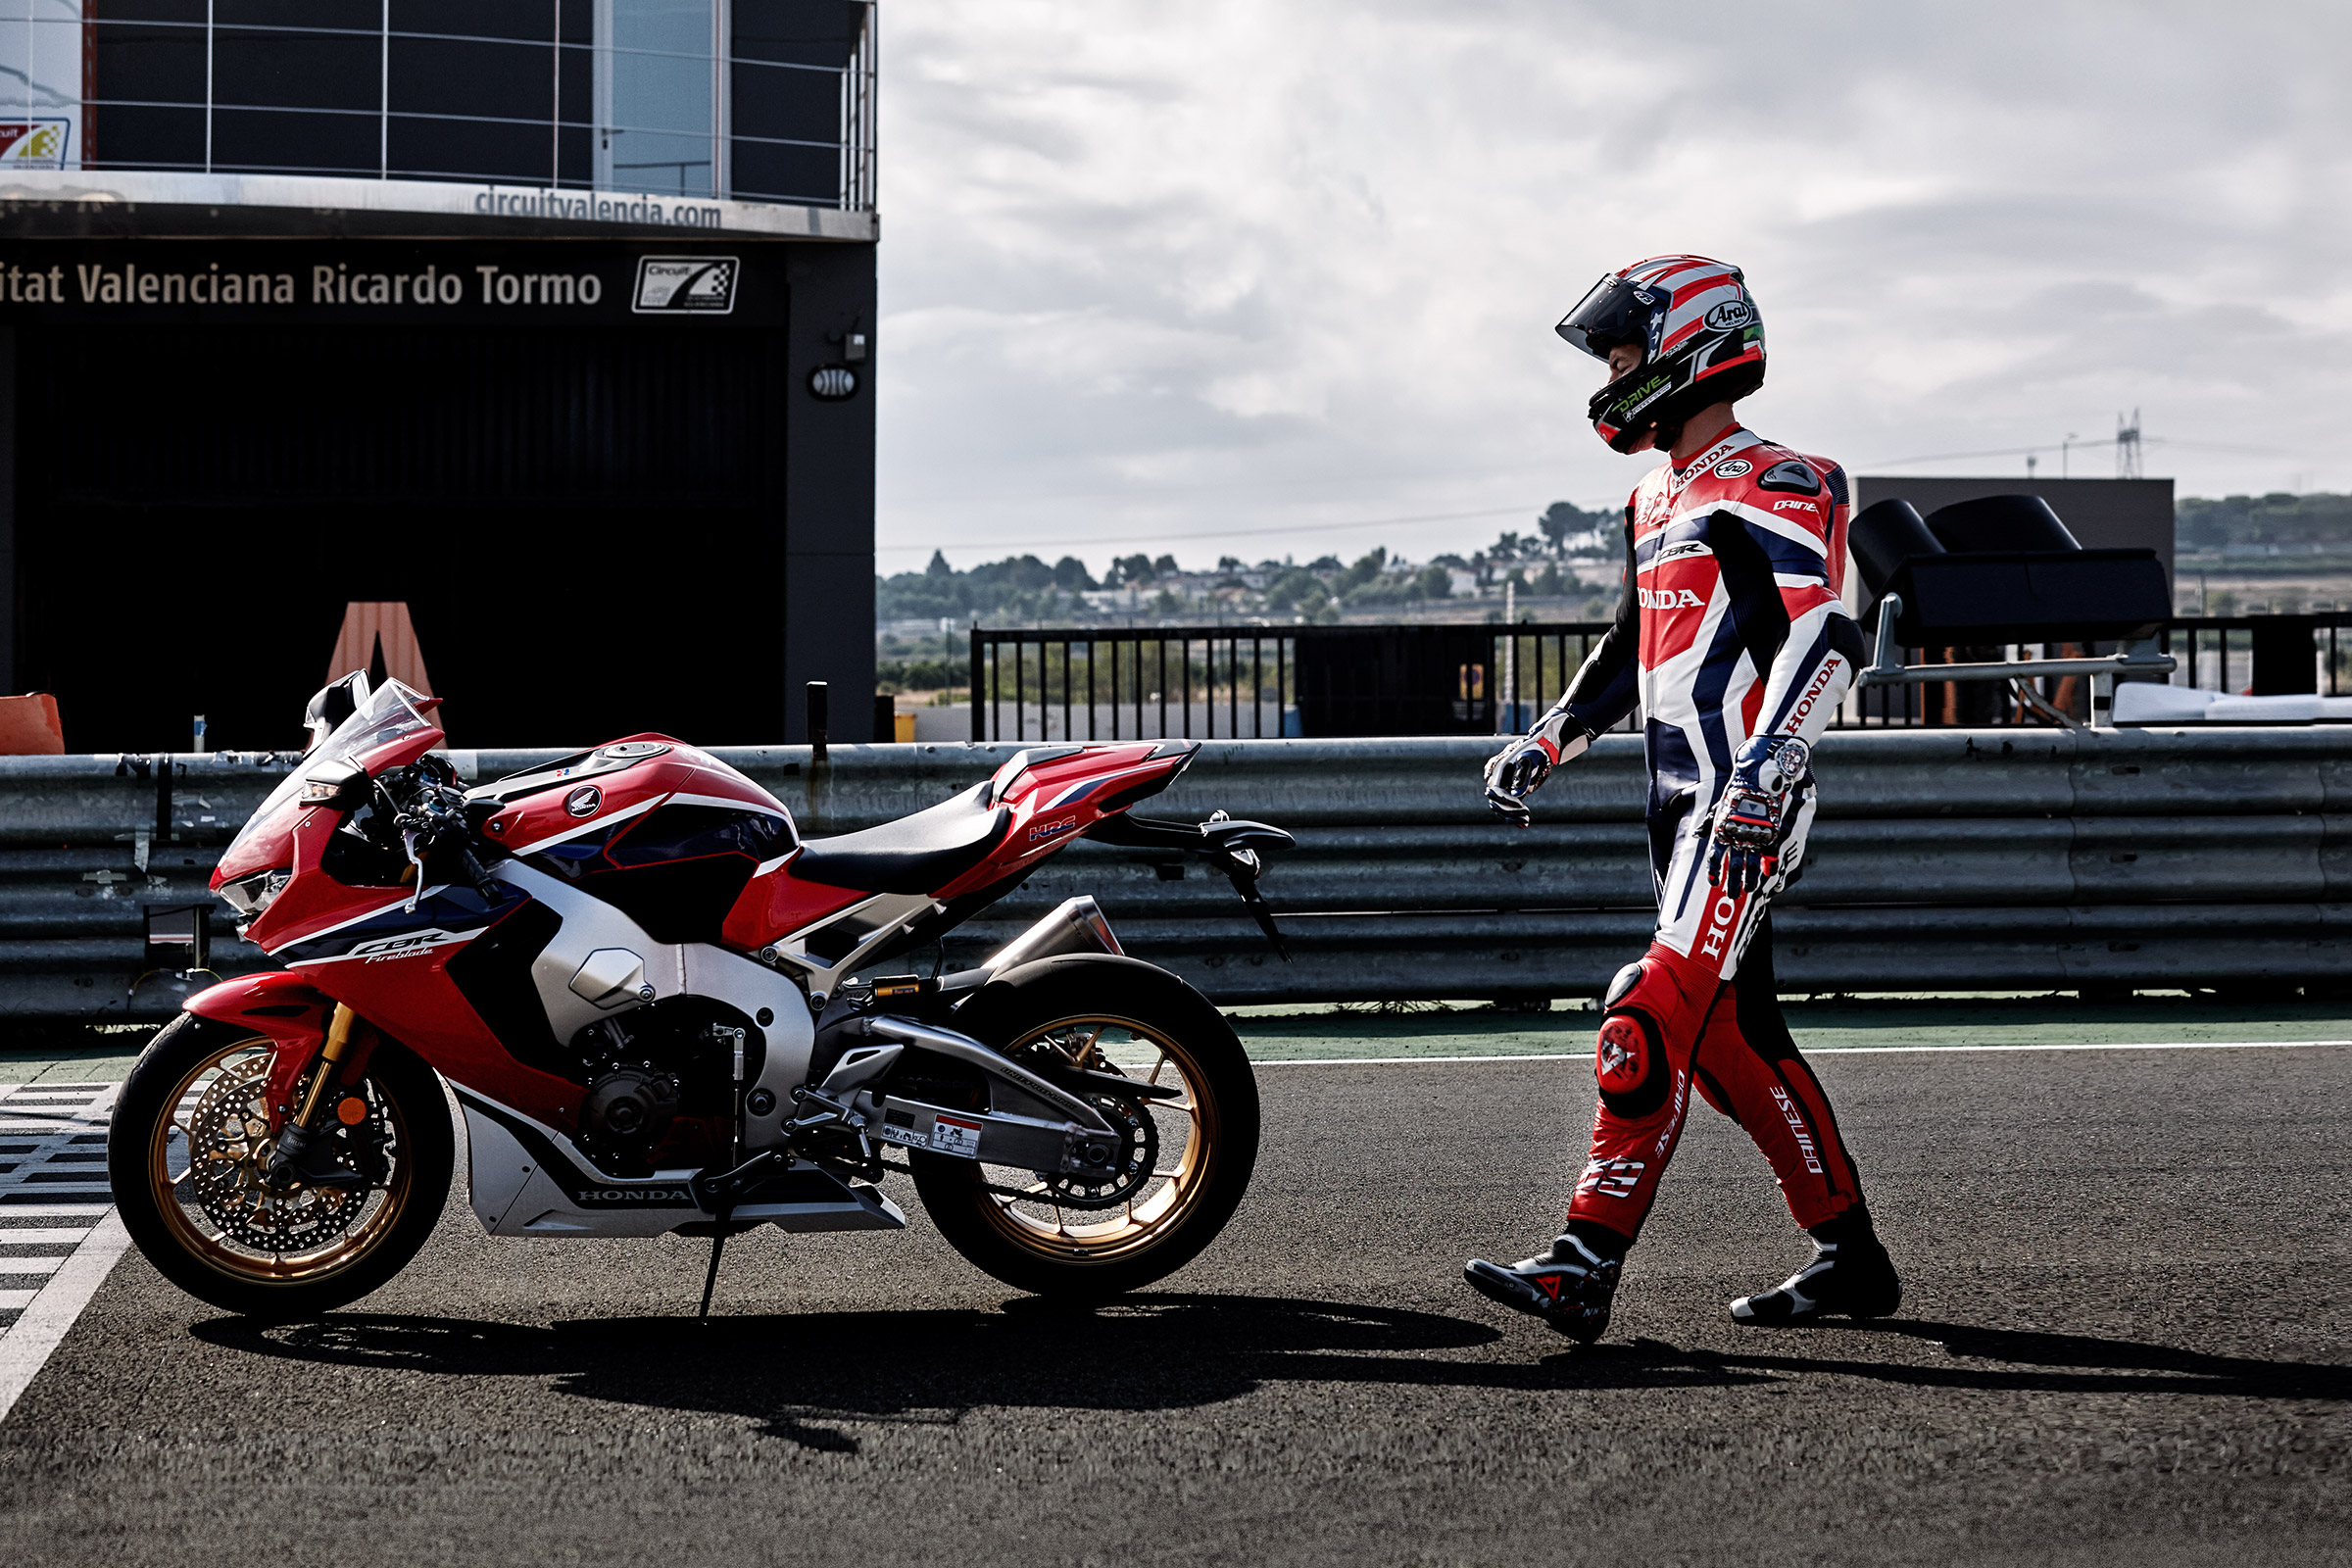 17 Honda Cbr1000rr And Cbr1000rr Sp First Look The Empire